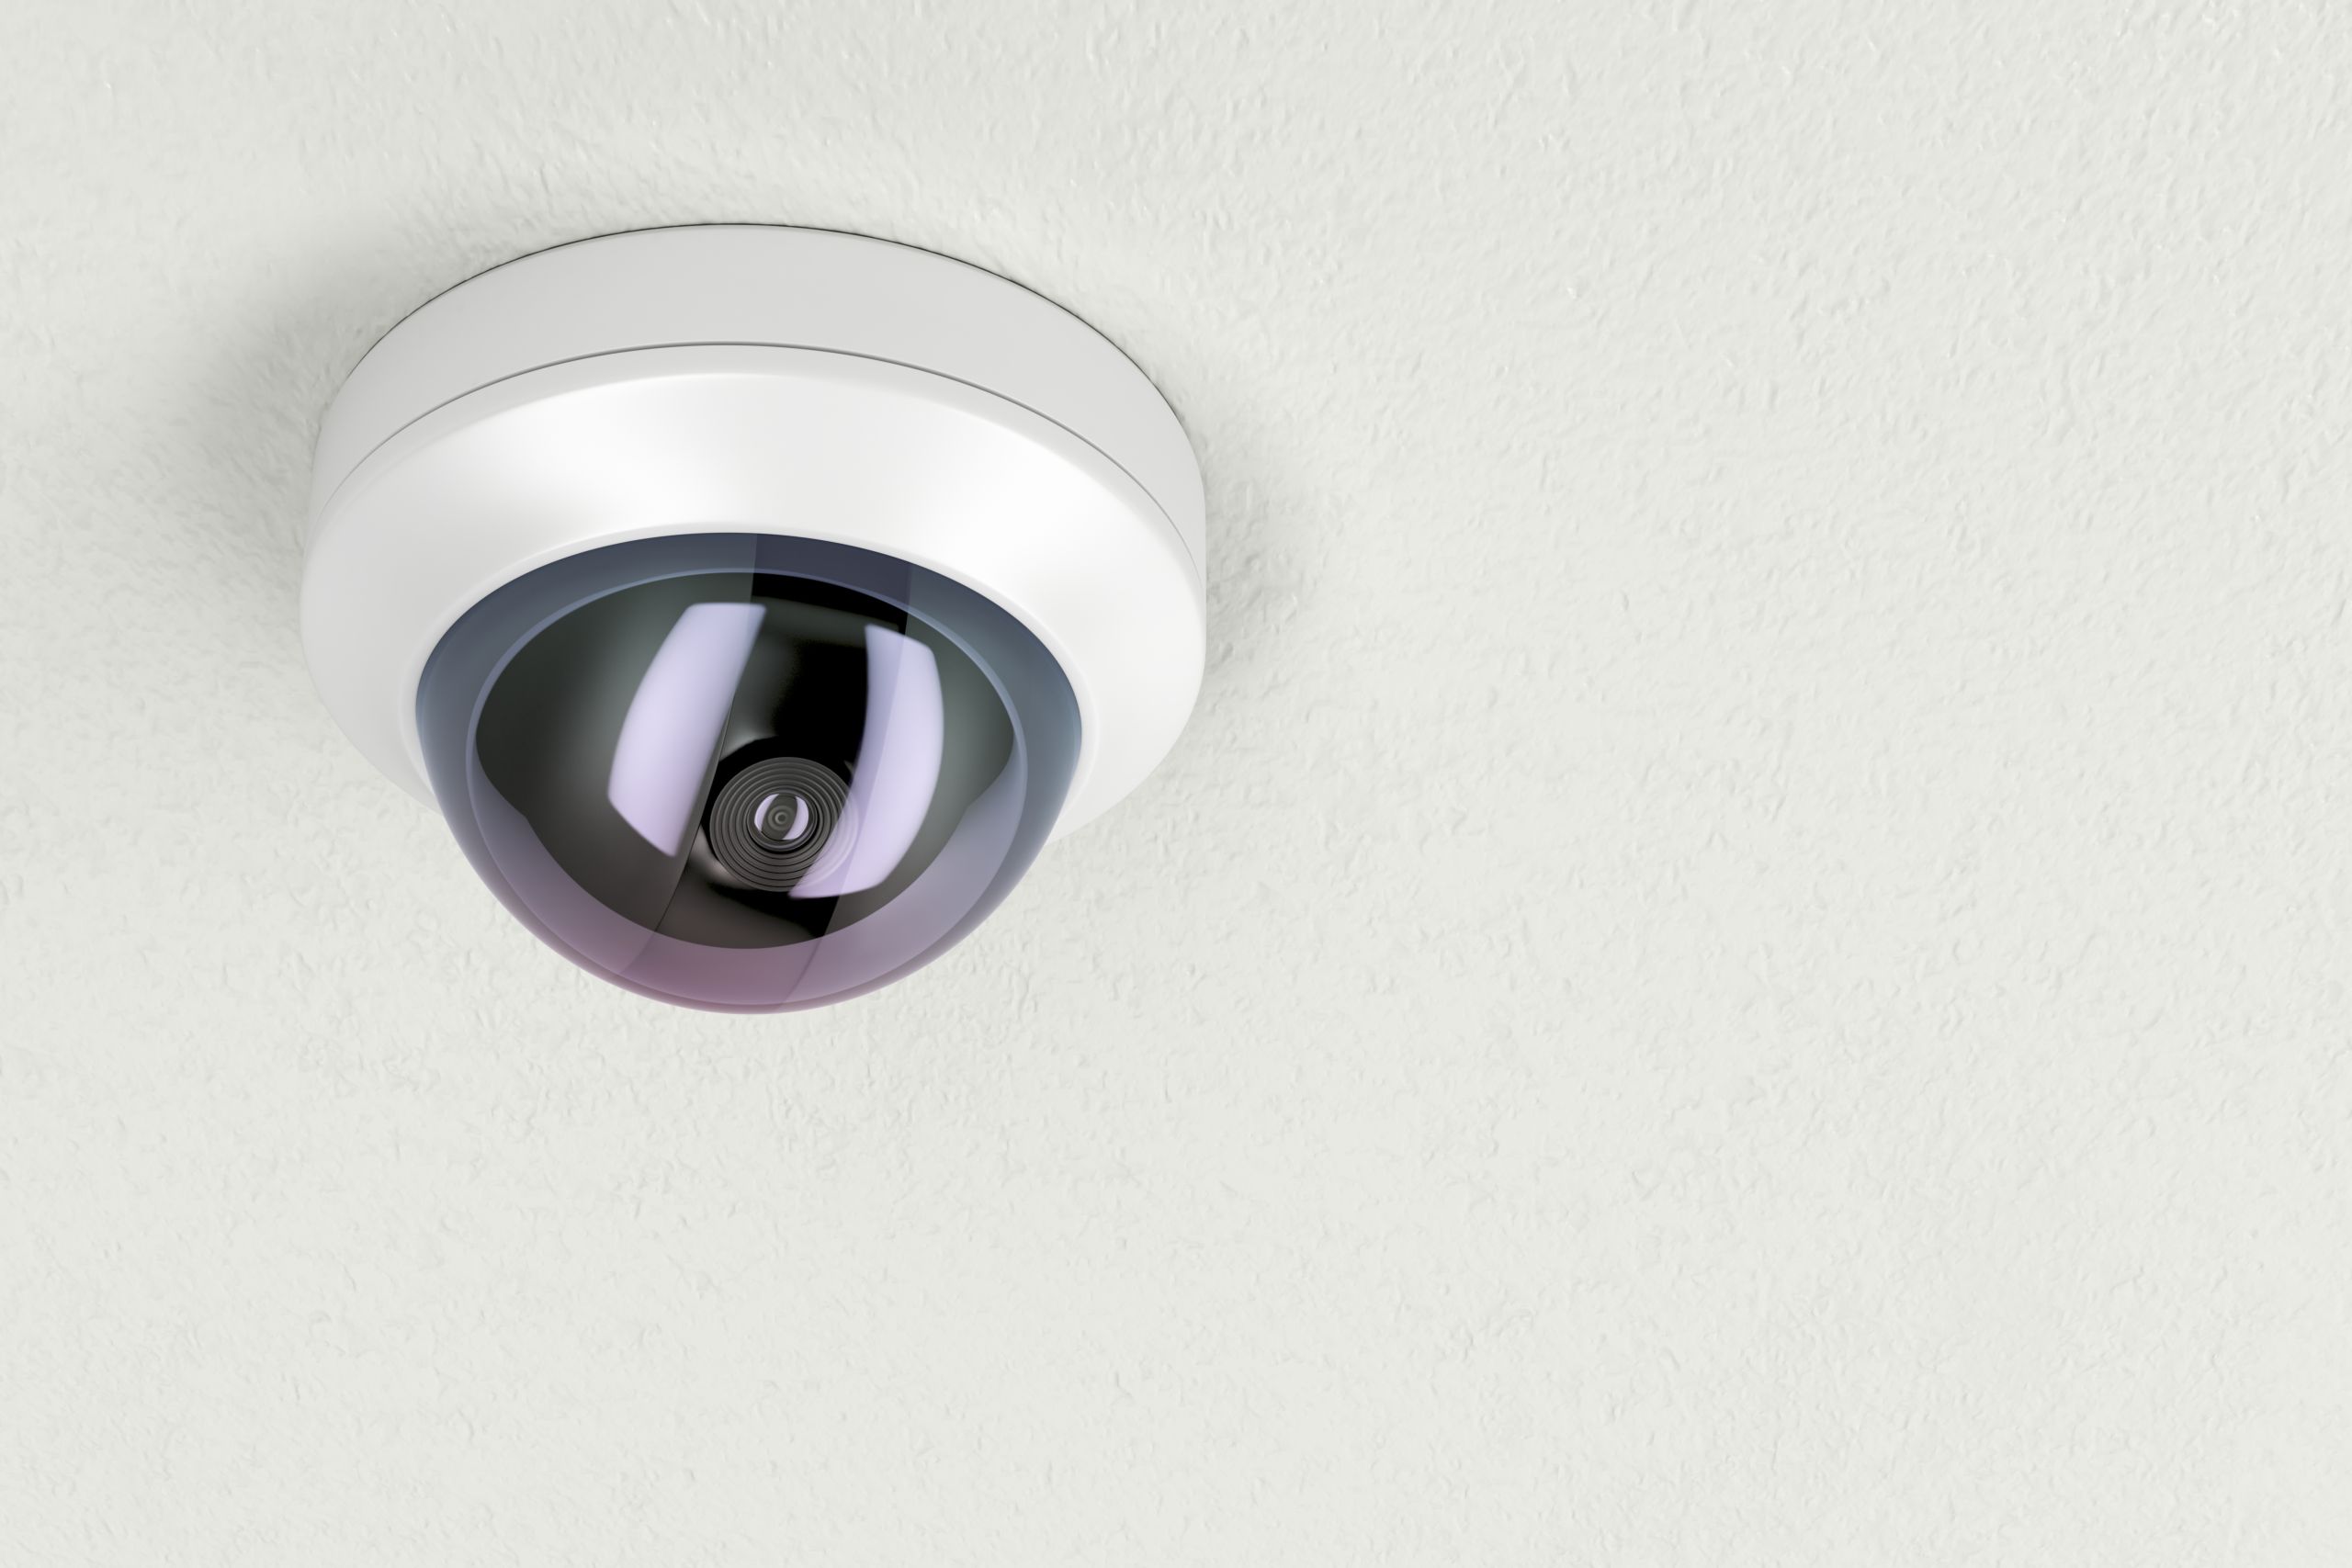 How To Mount A Dome Security Camera